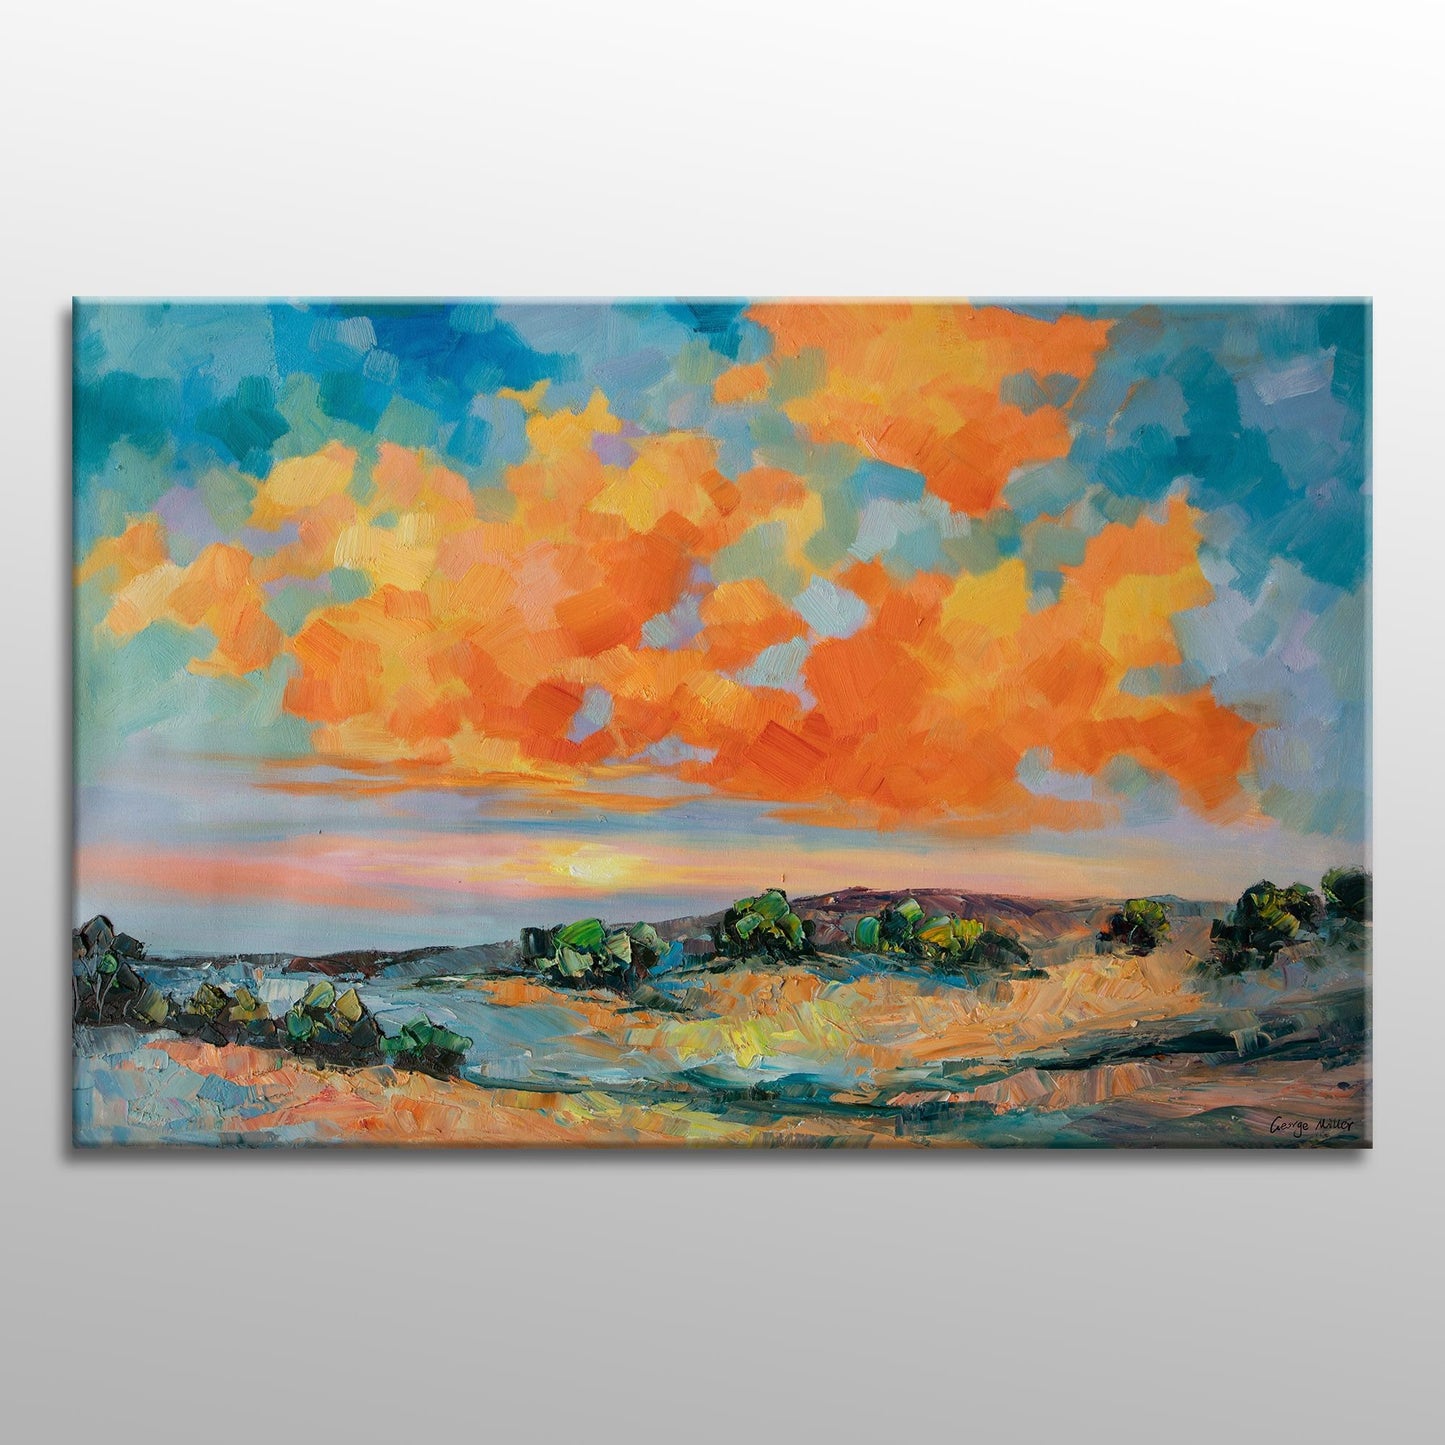 Original Abstract Landscape Oil Painting, Add a pop of color to your living room with this large abstract landscape oil painting